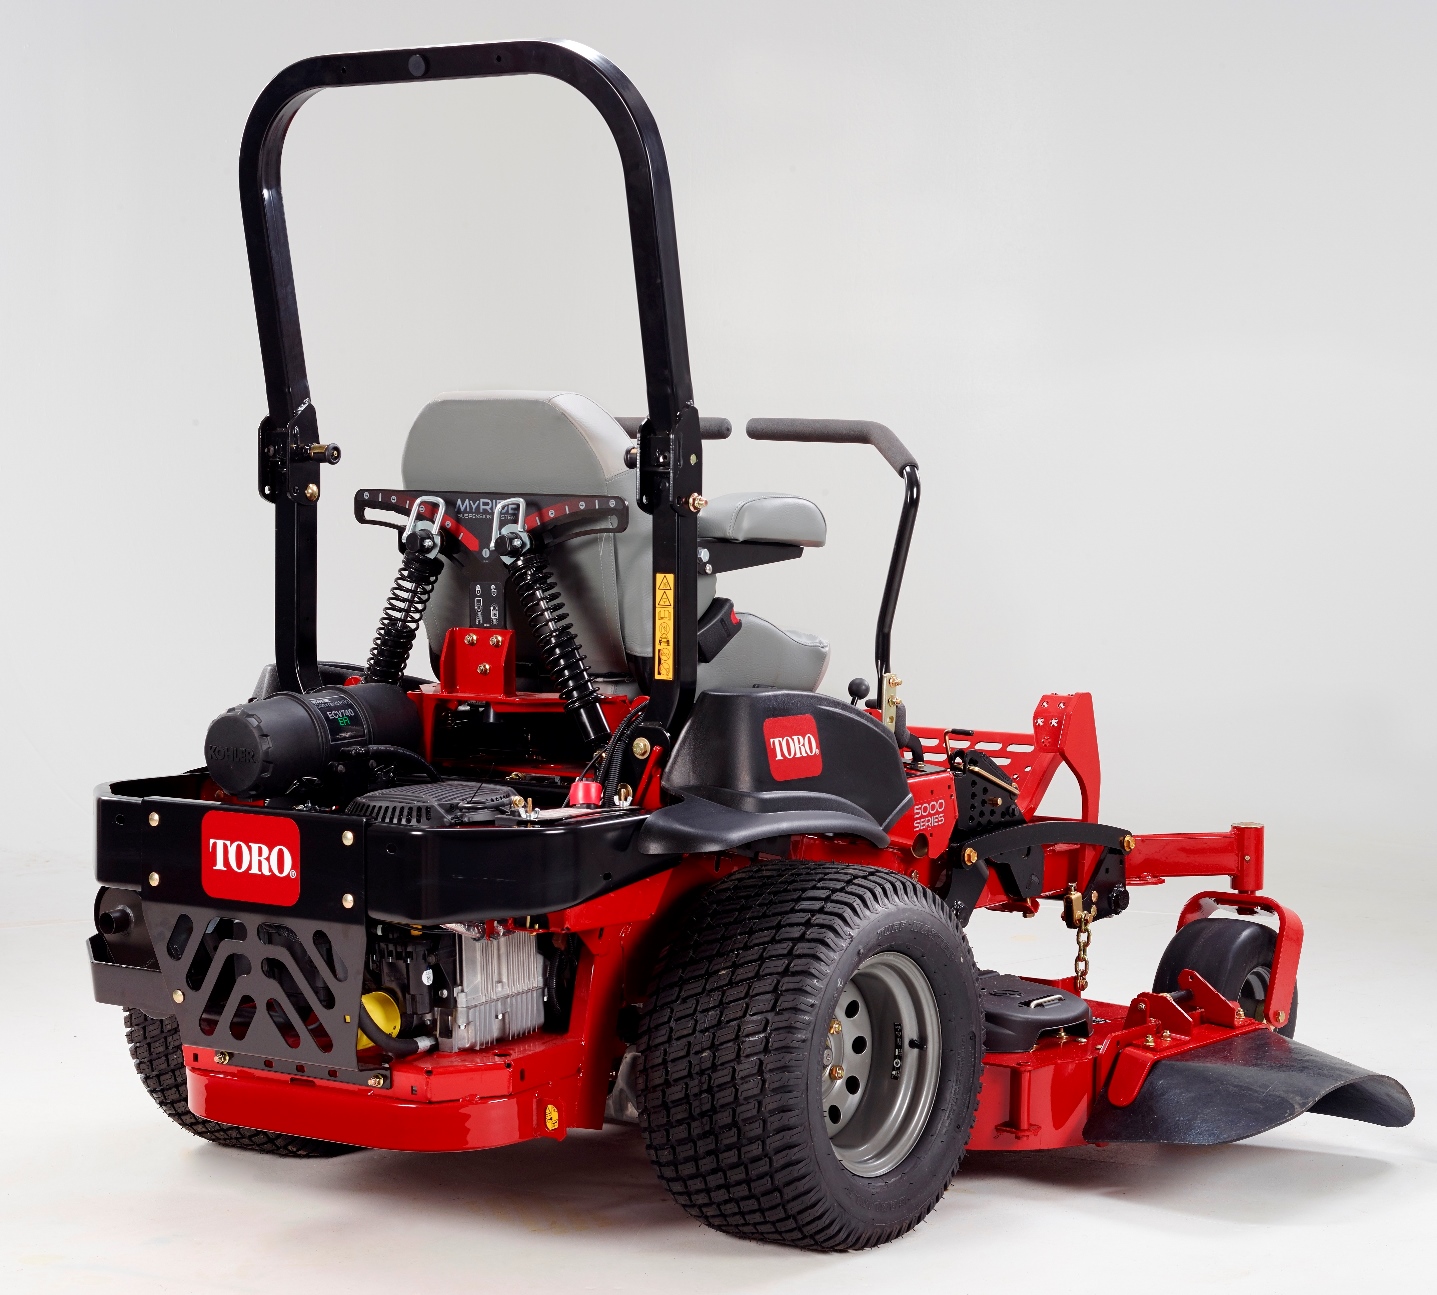 If you spend long hours mowing, you will want to try the Toro MyRIDE suspension system!